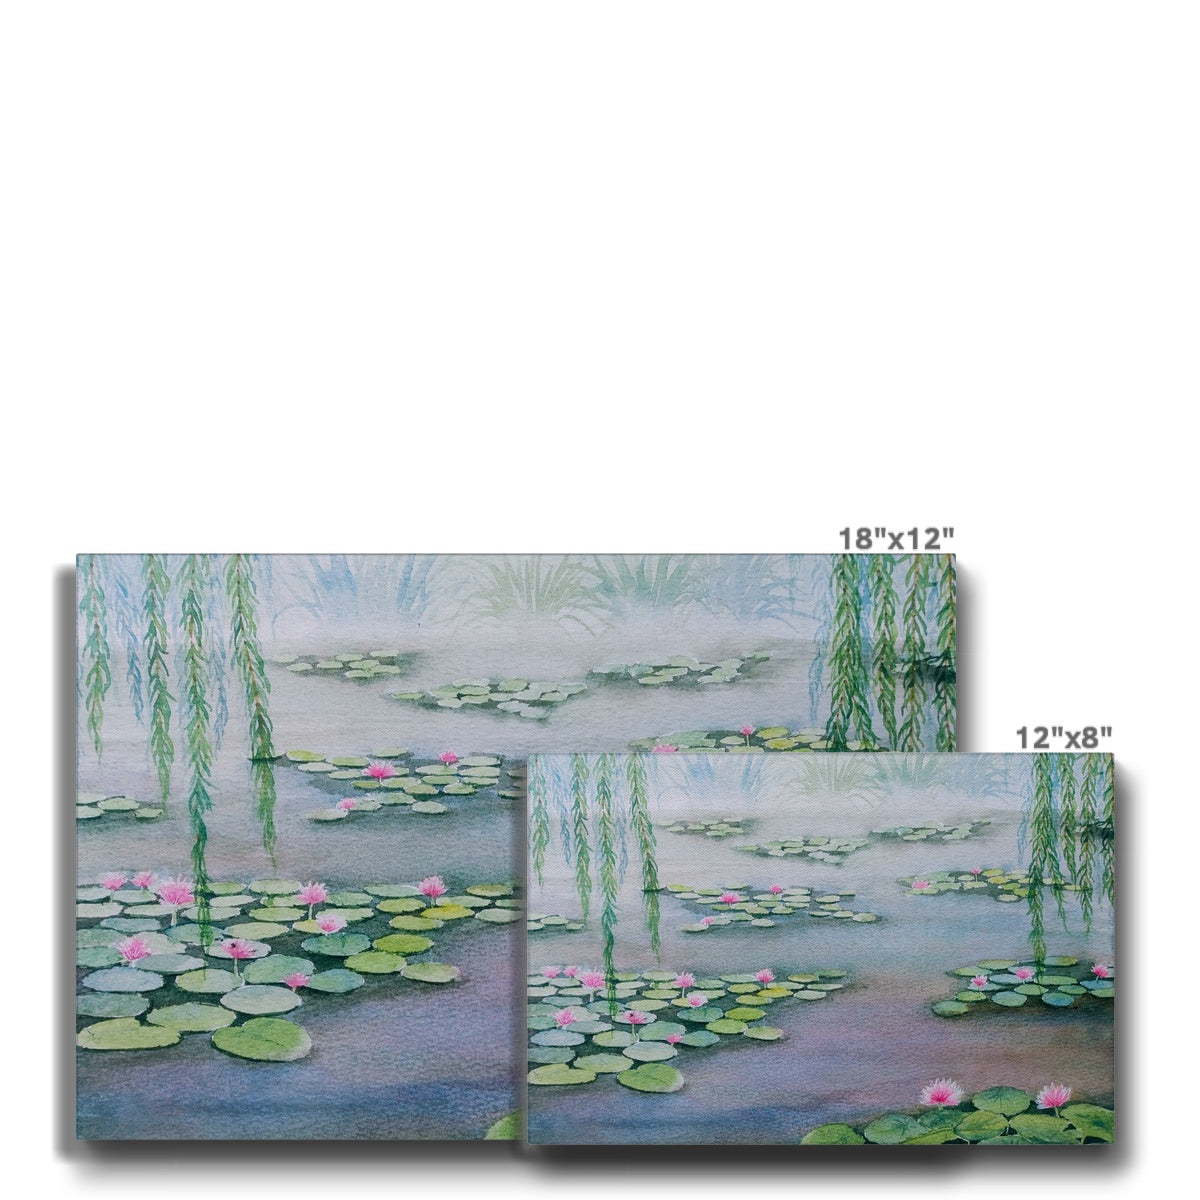 Mesmerizing Monet Water Lilies Painting Canvas